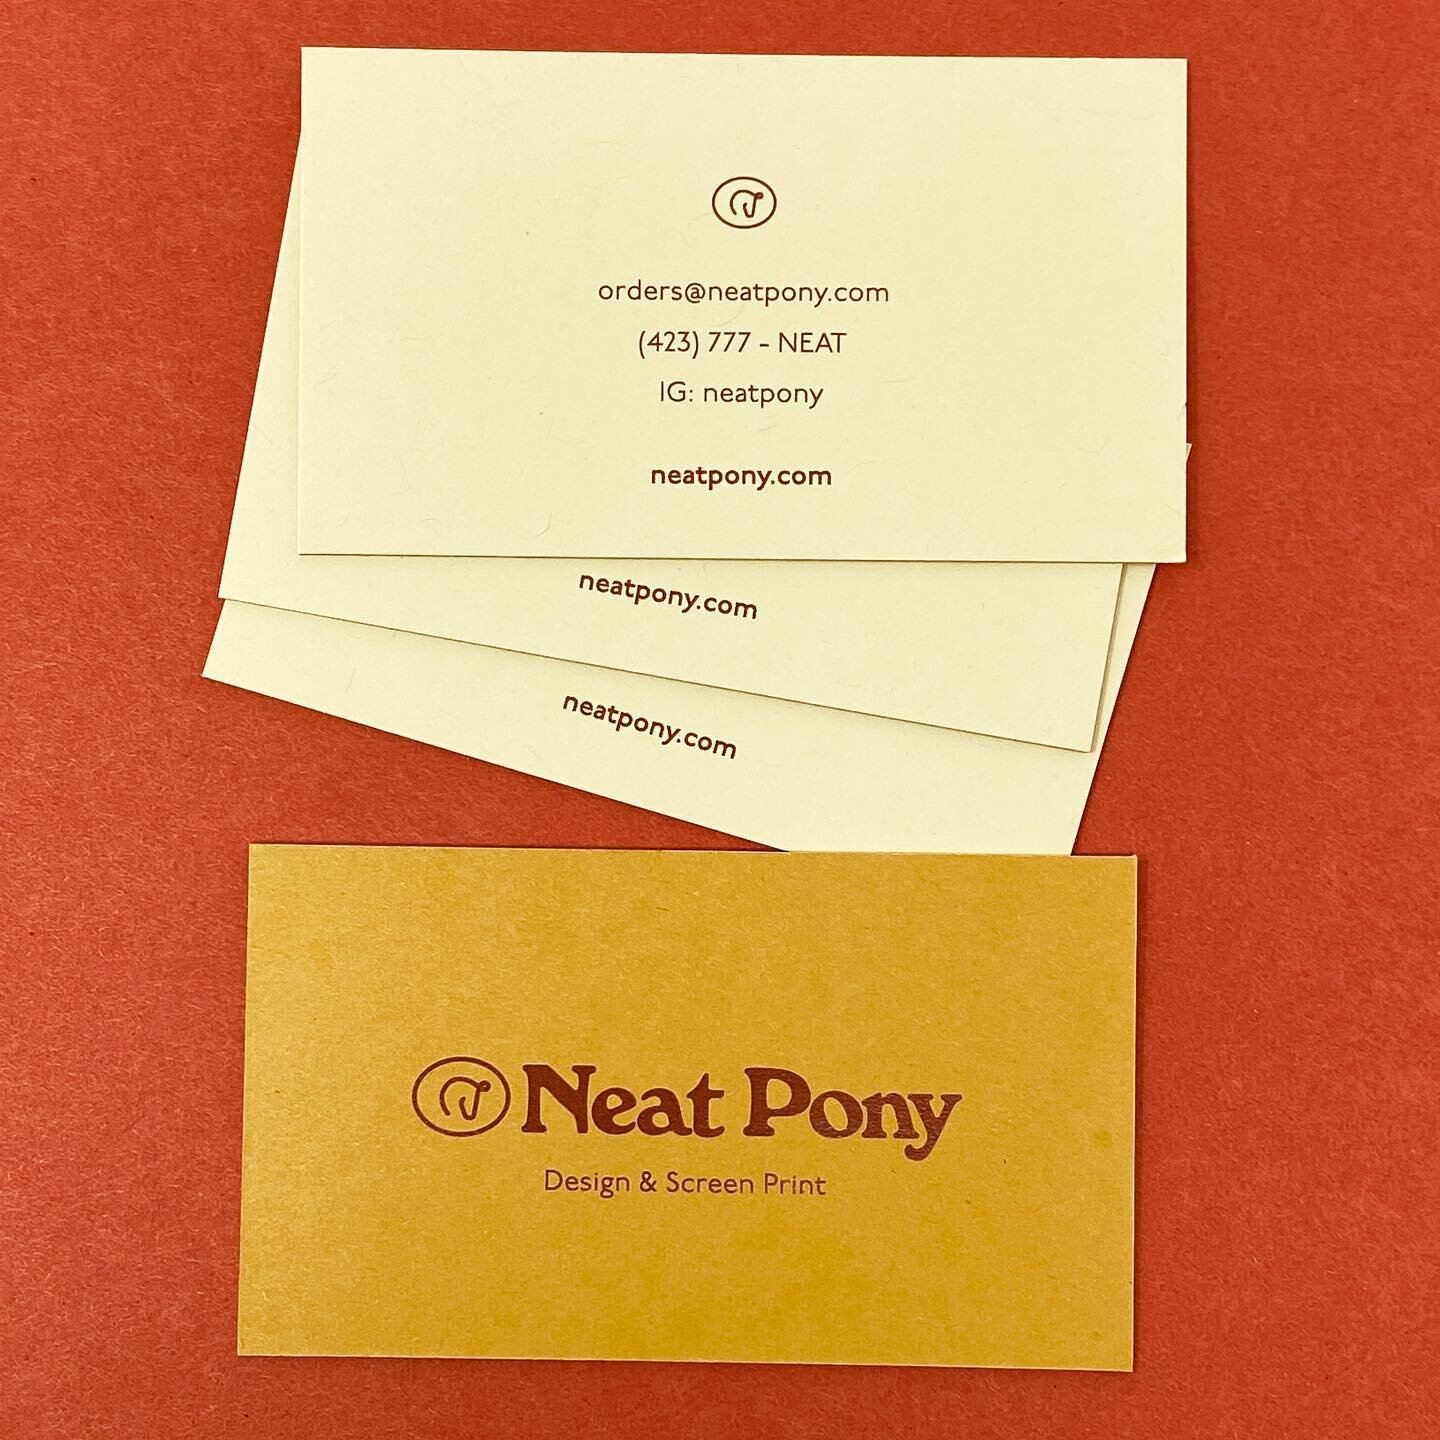 Today&rsquo;s #wpspotlight is our friends over at @neatpony&rsquo;s -neat- business card! Printed on #frenchpaper #CementGreen and #paperbagkraft #thickcarded together. 

If you&rsquo;re interested in local #silkscreened #tshirts and working with coo